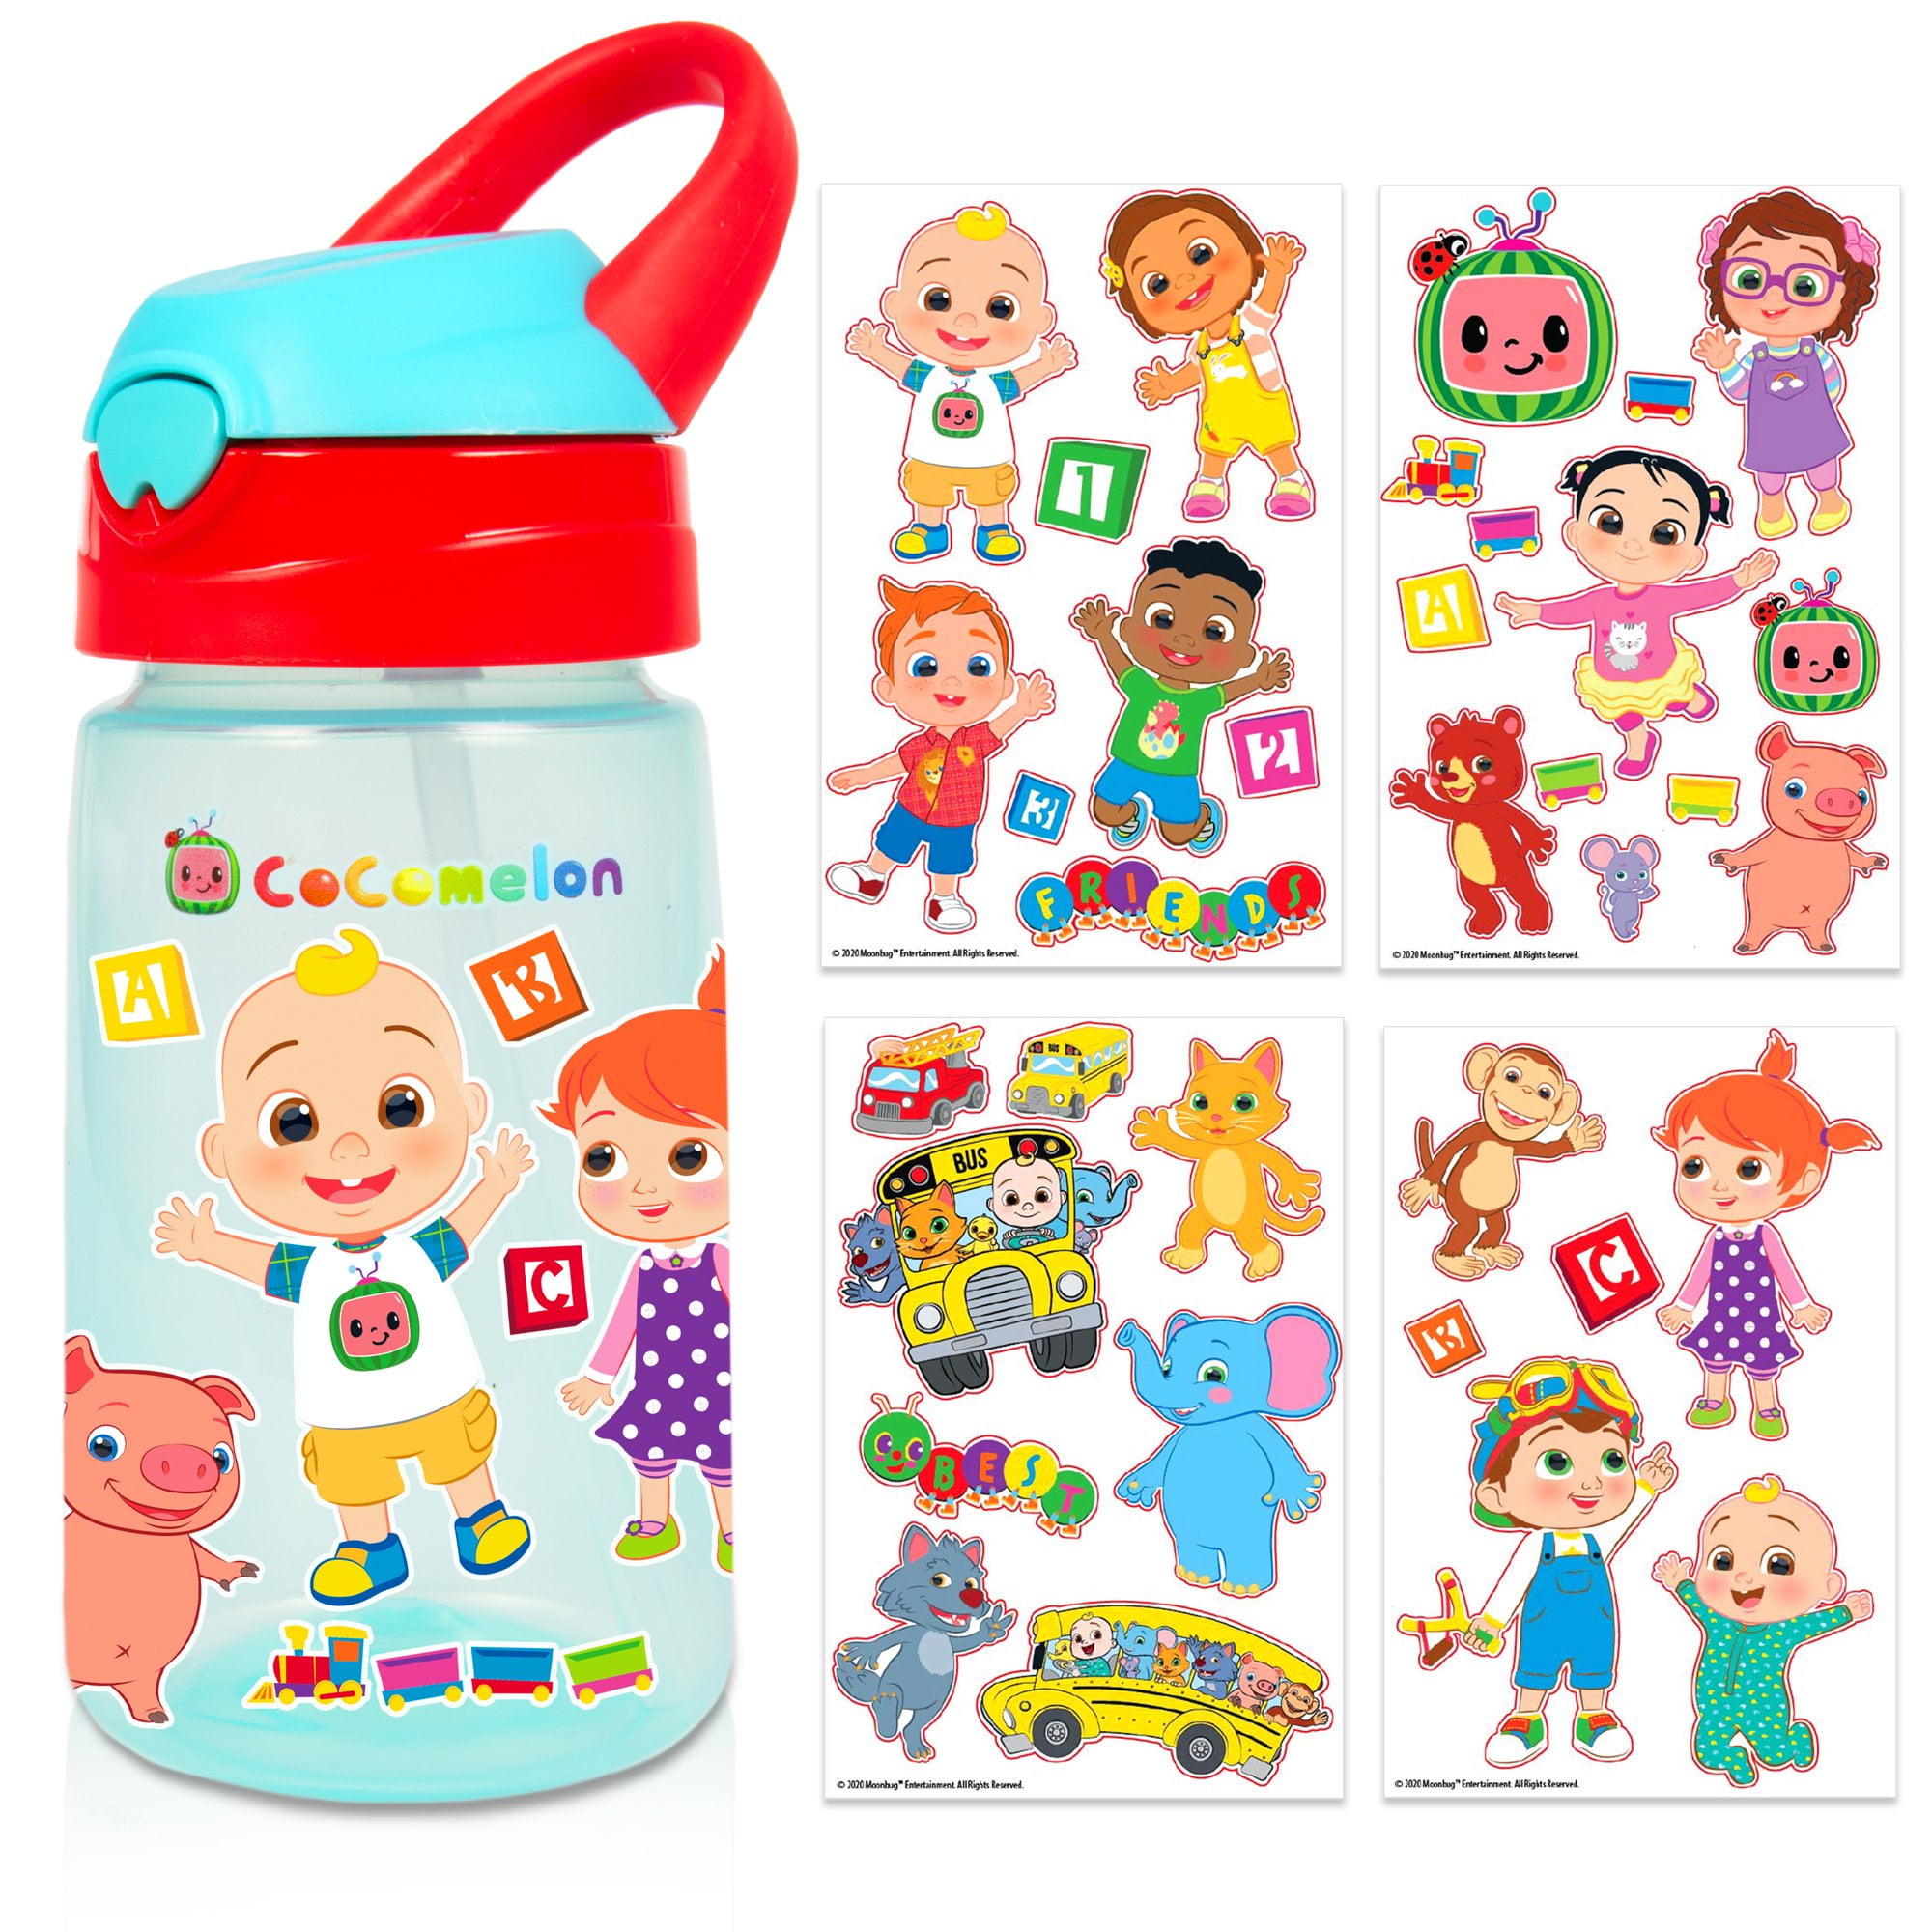  Gifts for Girls, Decorate Your Own Water Bottle for